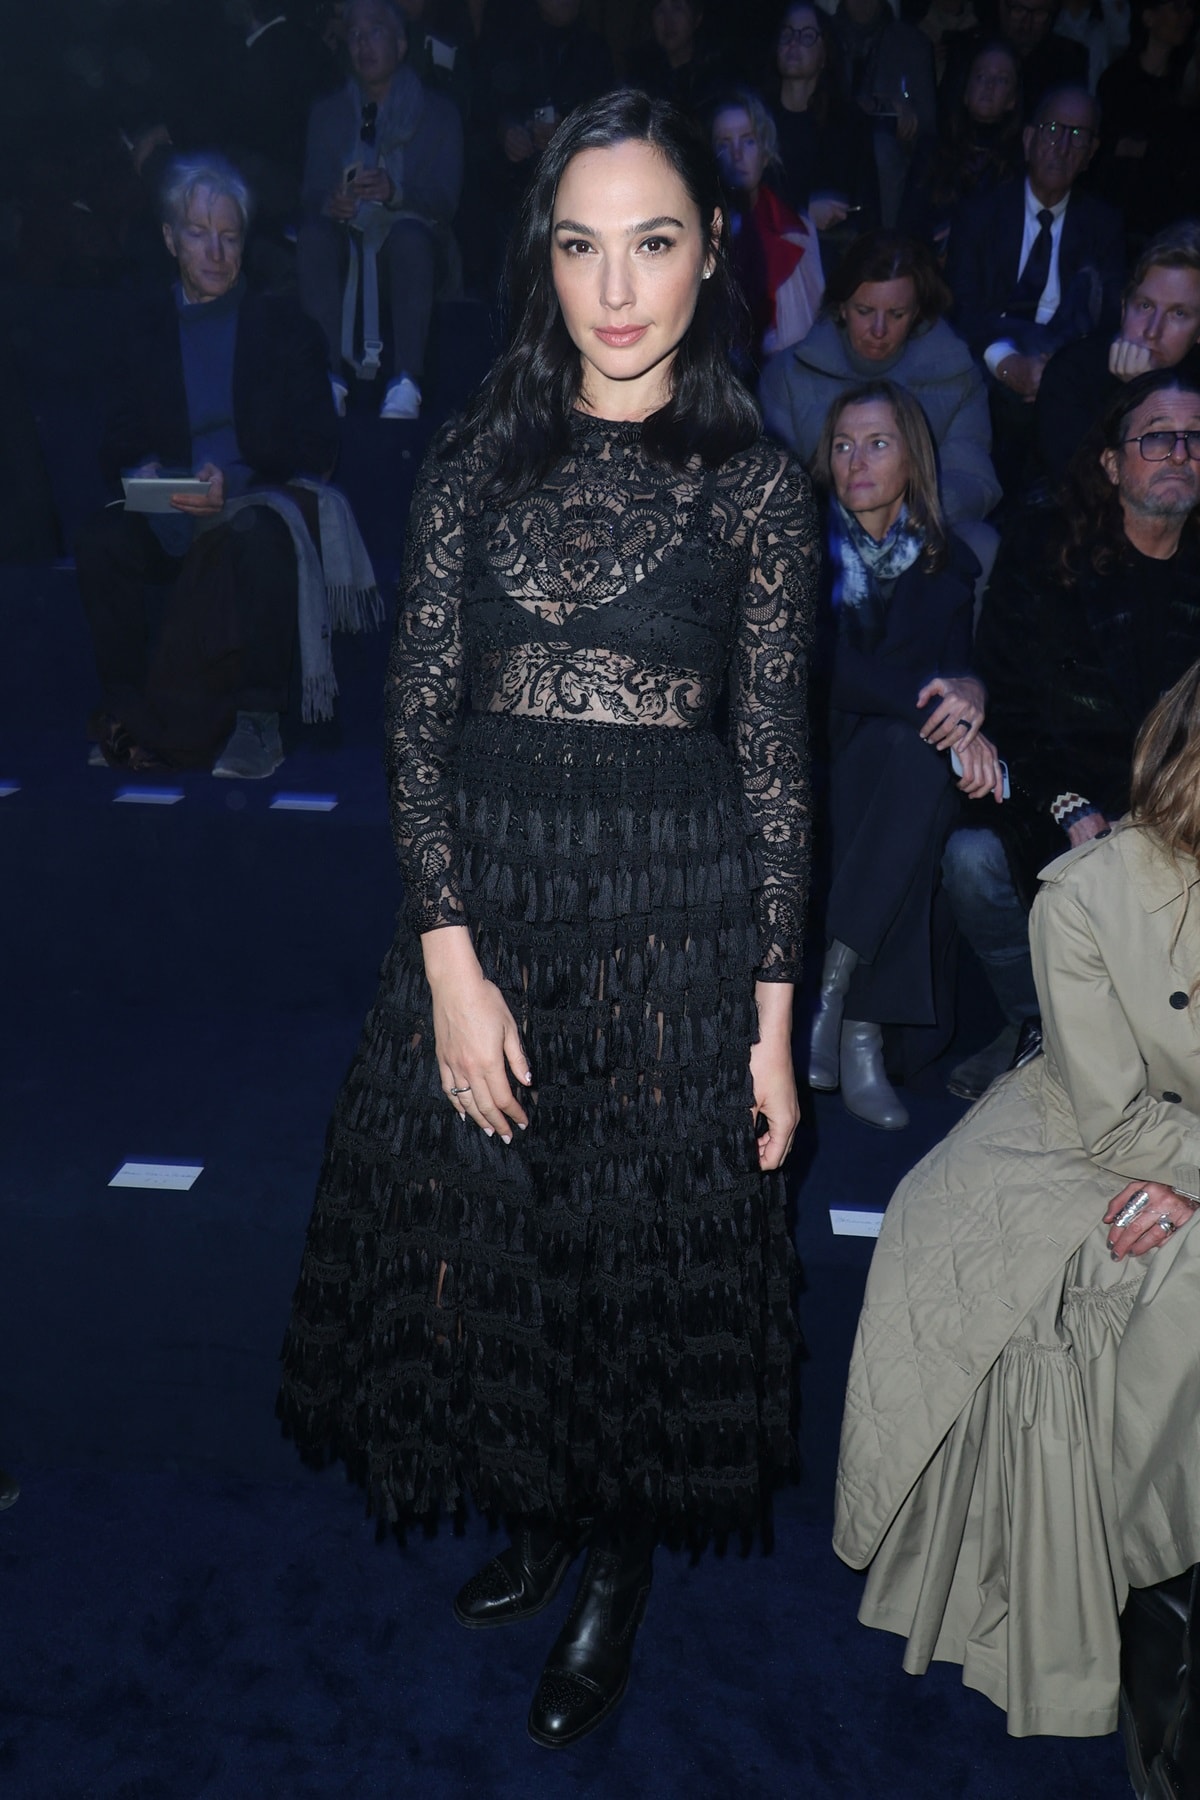 Gal Gadot donned an all-black ensemble, comprising a lace top with a mock neckline layered over a black bralette at the Christian Dior Fall 2023 Ready To Wear Runway Show